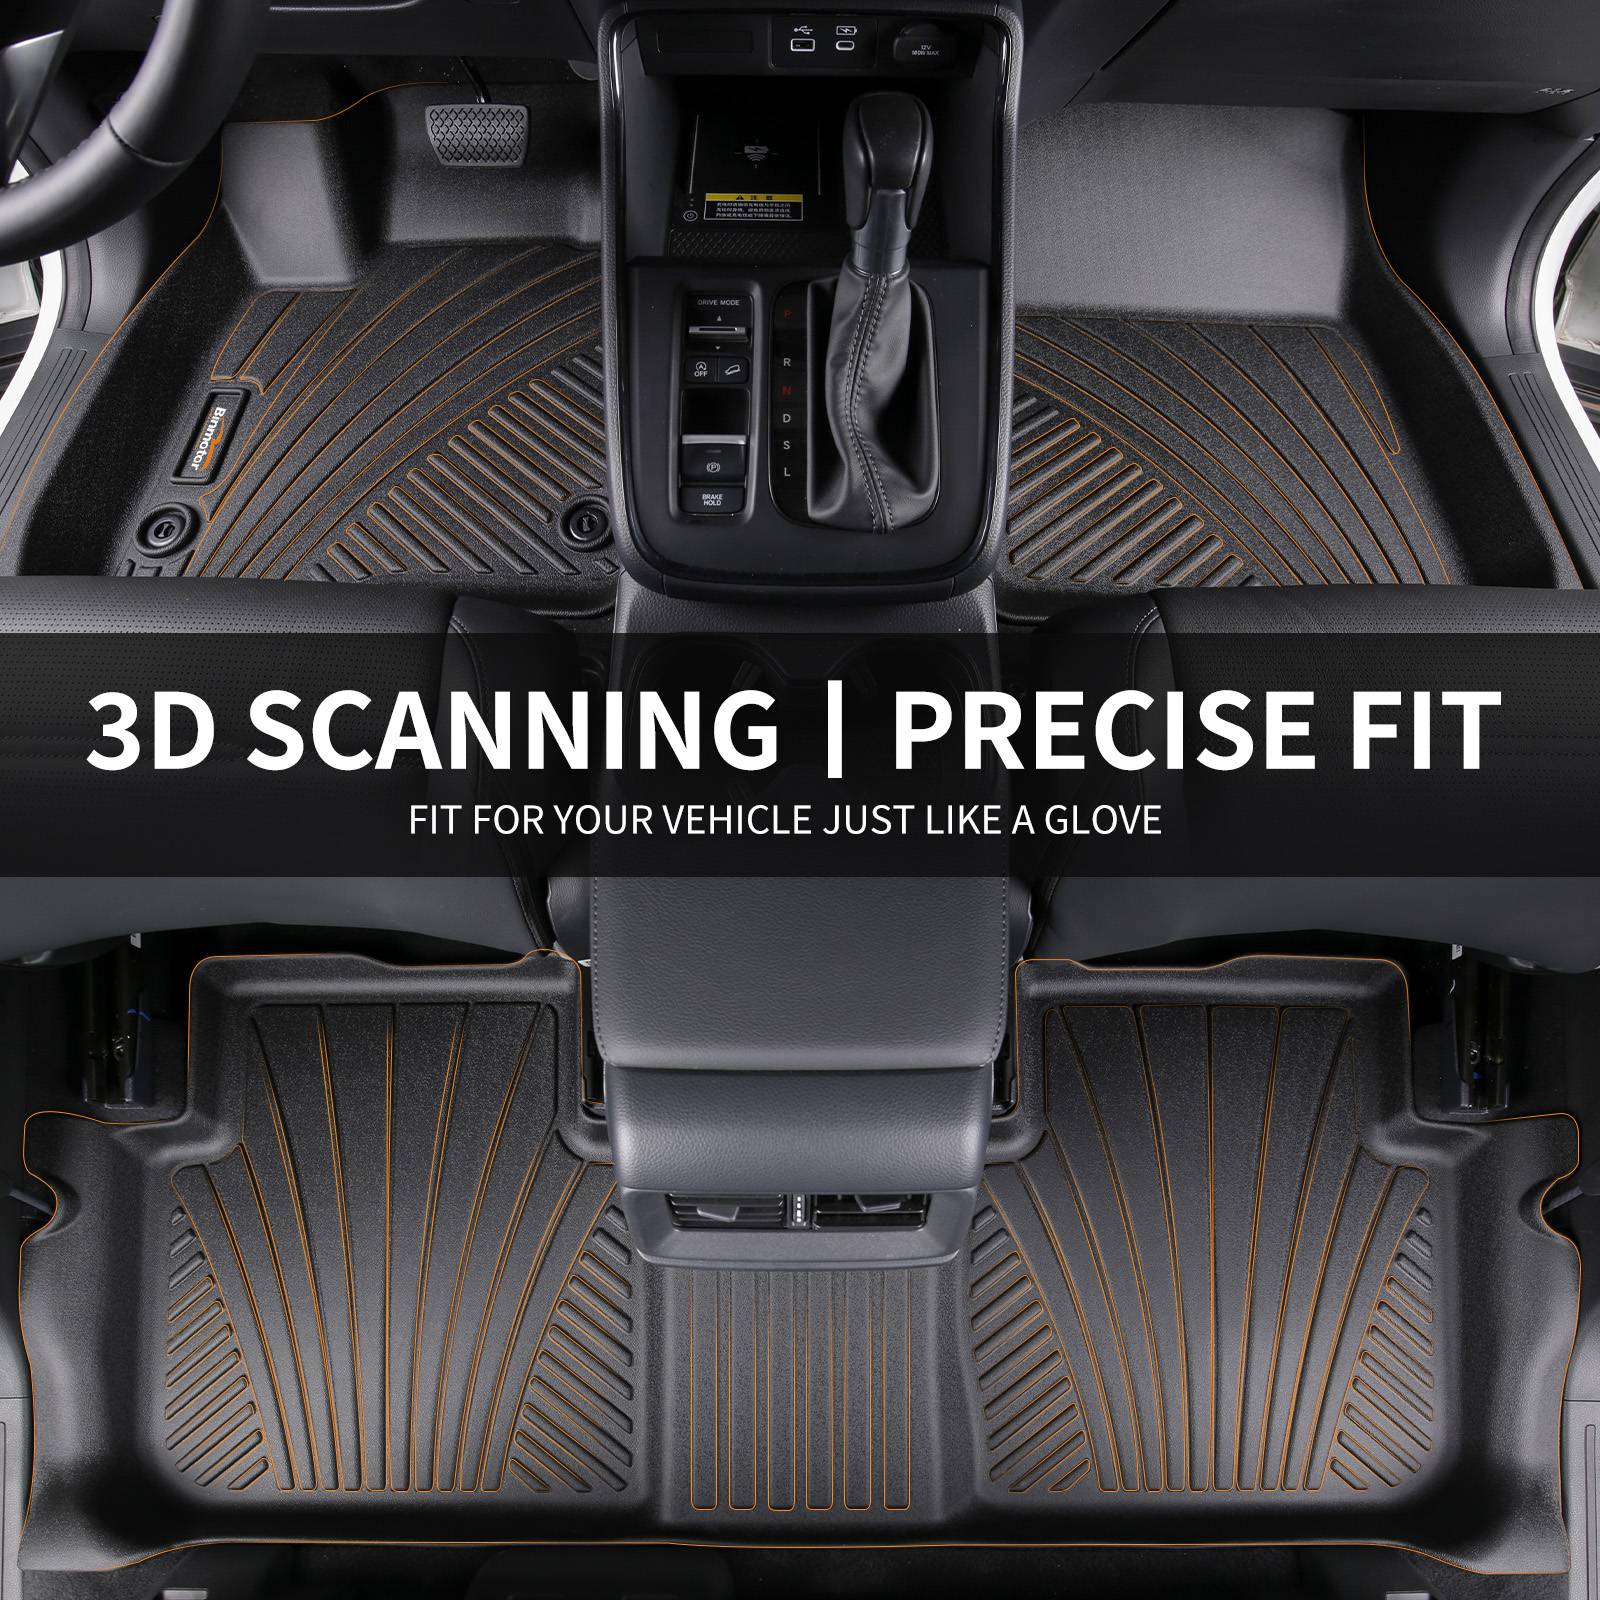 Binmotor-Floor Mats for TPE Floor Mats for Toyota Highlander 8 Seats , All Weather Protection, Heavy Duty Automotive Car Floor Liners, Full Set Highlander Accessories Car Mats-Black（compatible year 2014-2019）